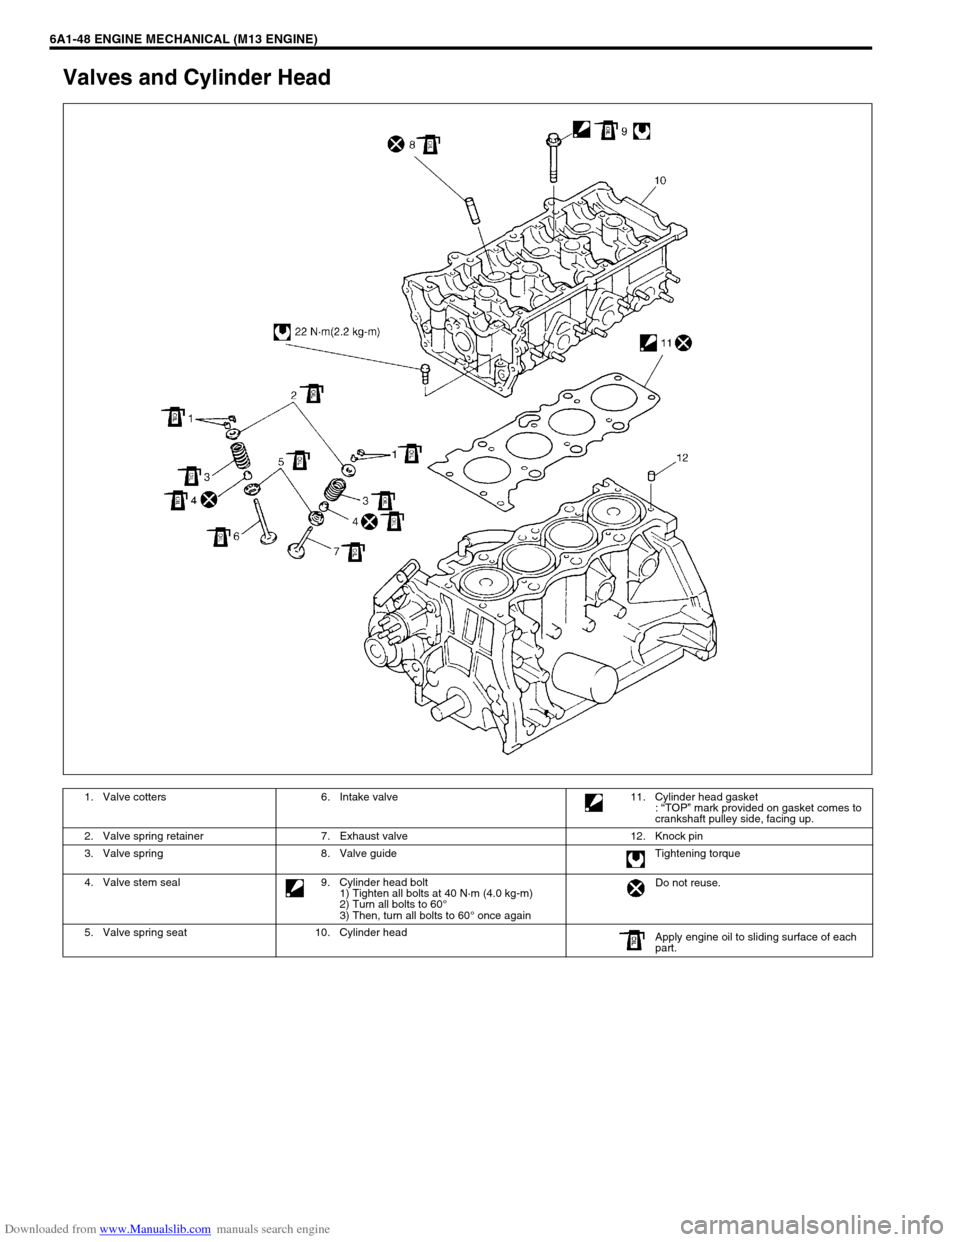 SUZUKI JIMNY 2005 3.G Service Workshop Manual Downloaded from www.Manualslib.com manuals search engine 6A1-48 ENGINE MECHANICAL (M13 ENGINE)
Valves and Cylinder Head
1. Valve cotters 6. Intake valve 11. Cylinder head gasket
: “TOP” mark provi